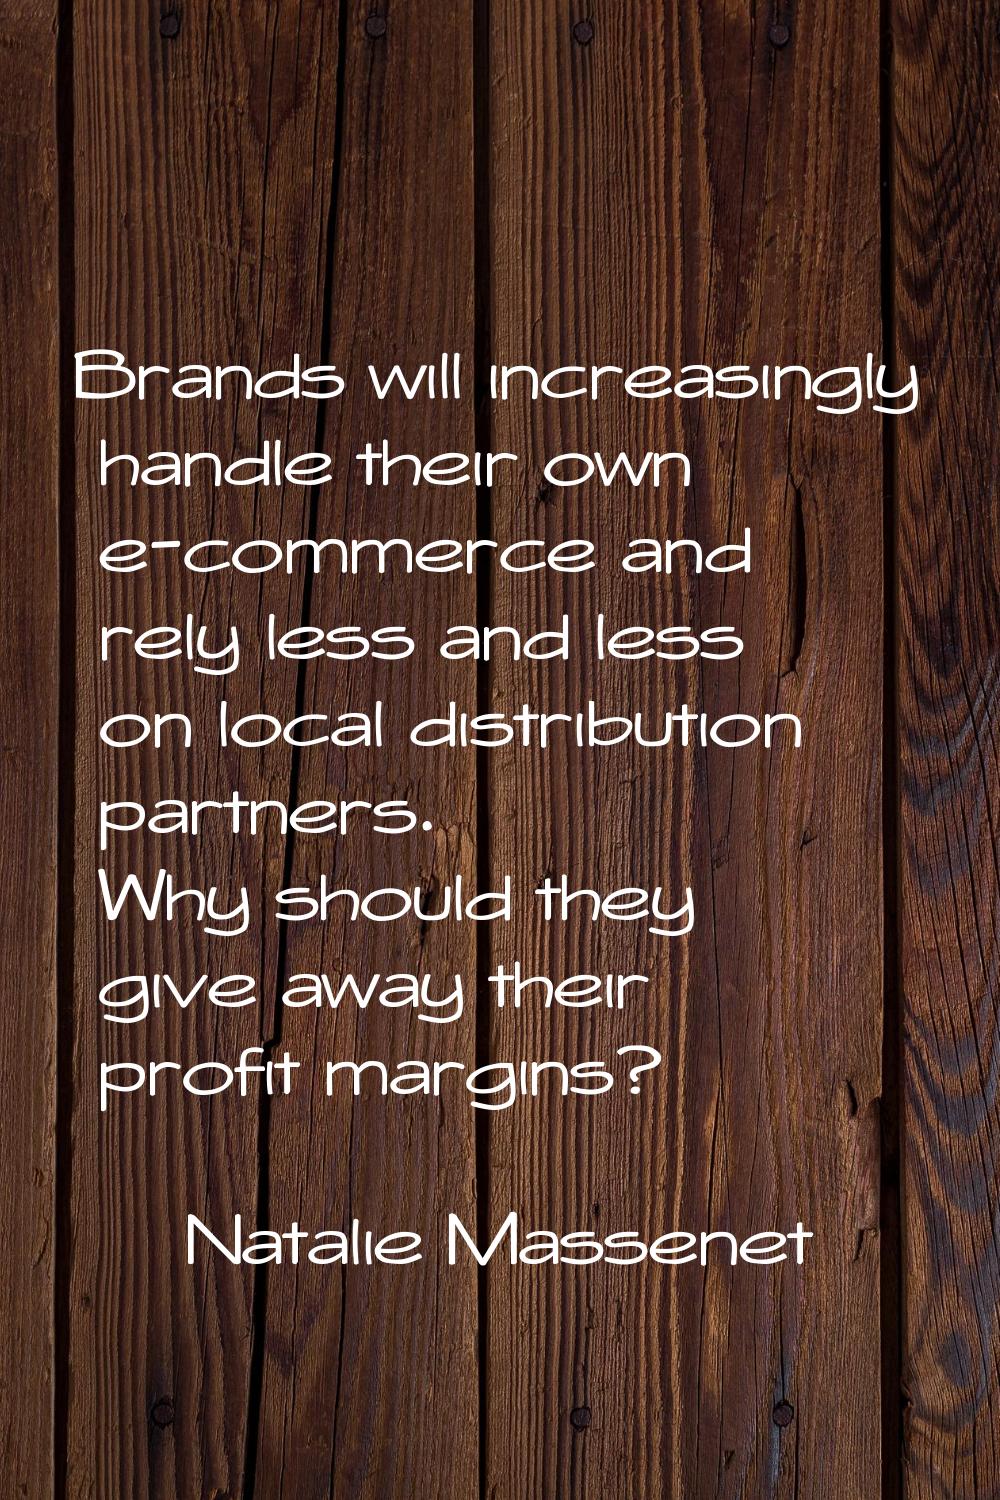 Brands will increasingly handle their own e-commerce and rely less and less on local distribution p